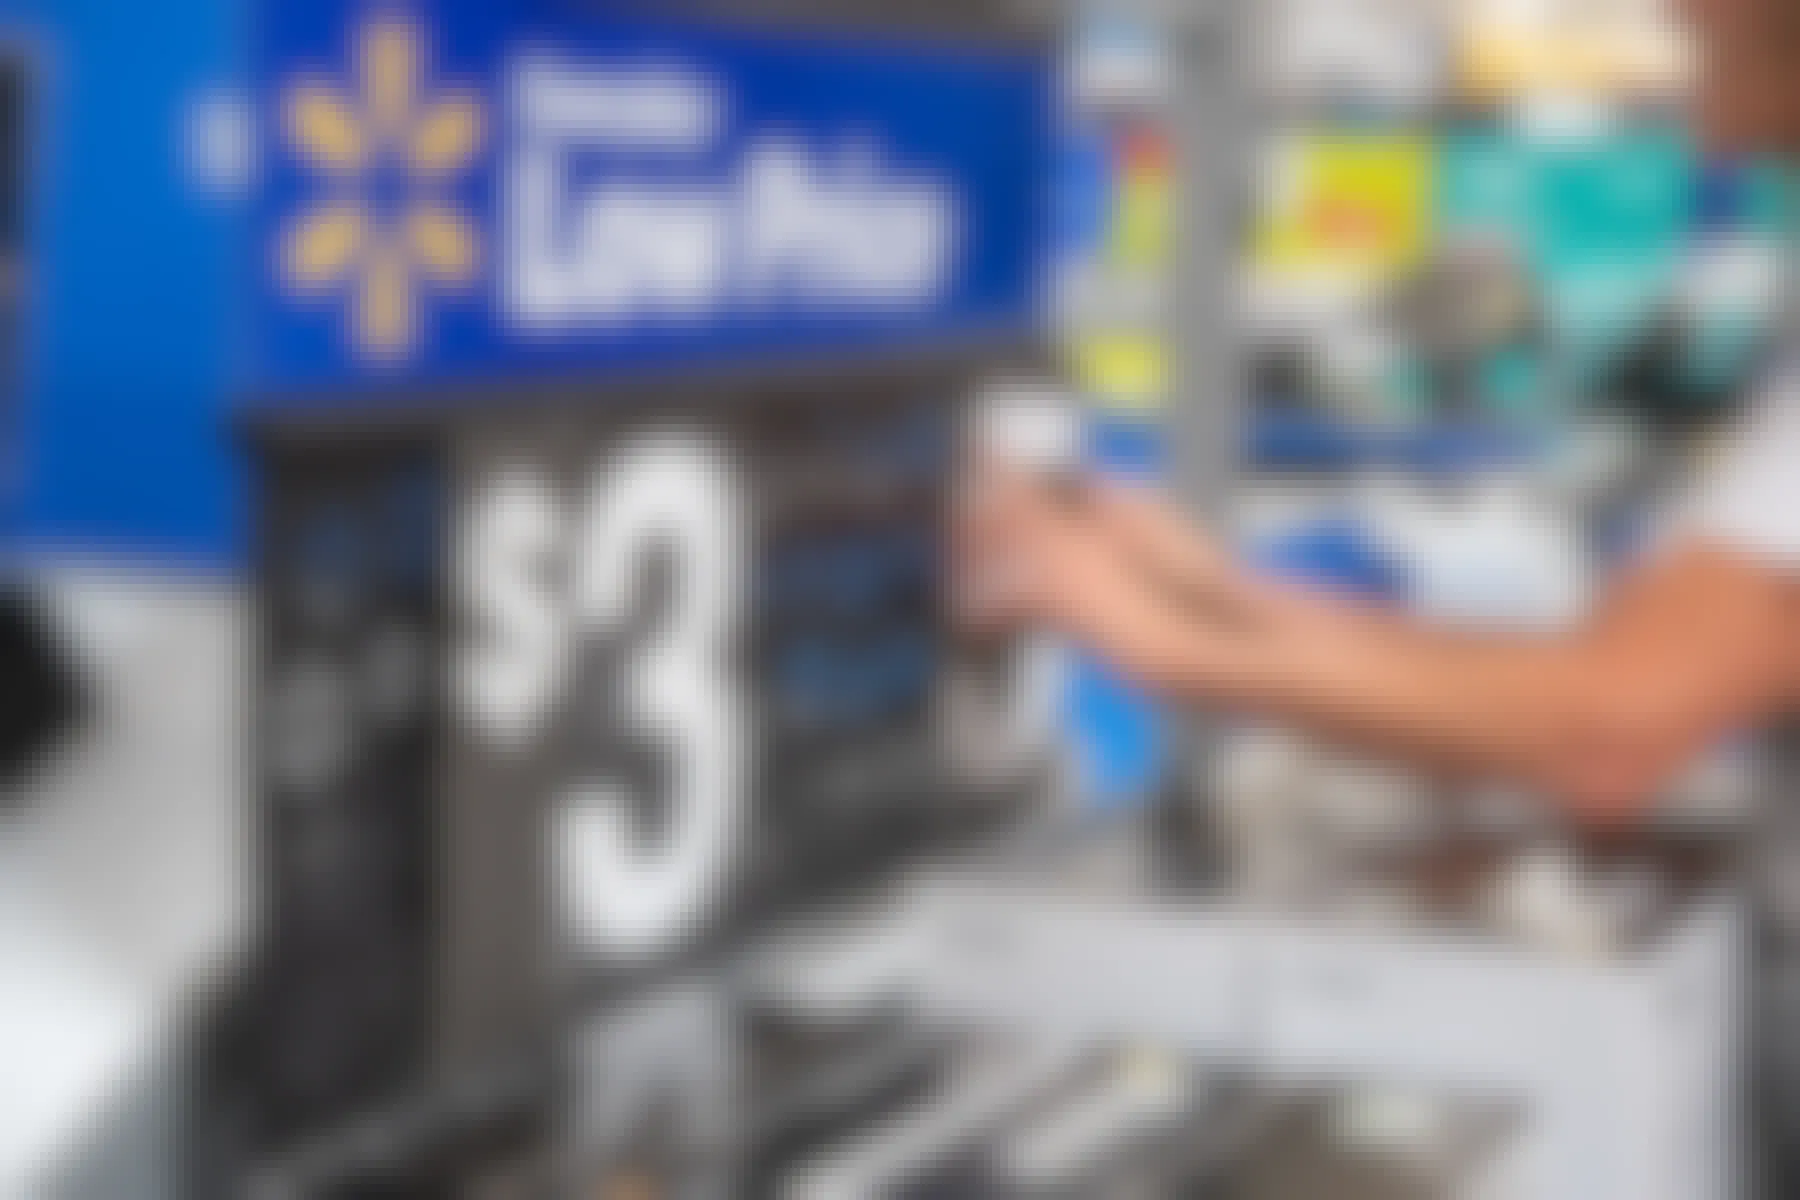 A Walmart employee changing the price on a sign above some printers.